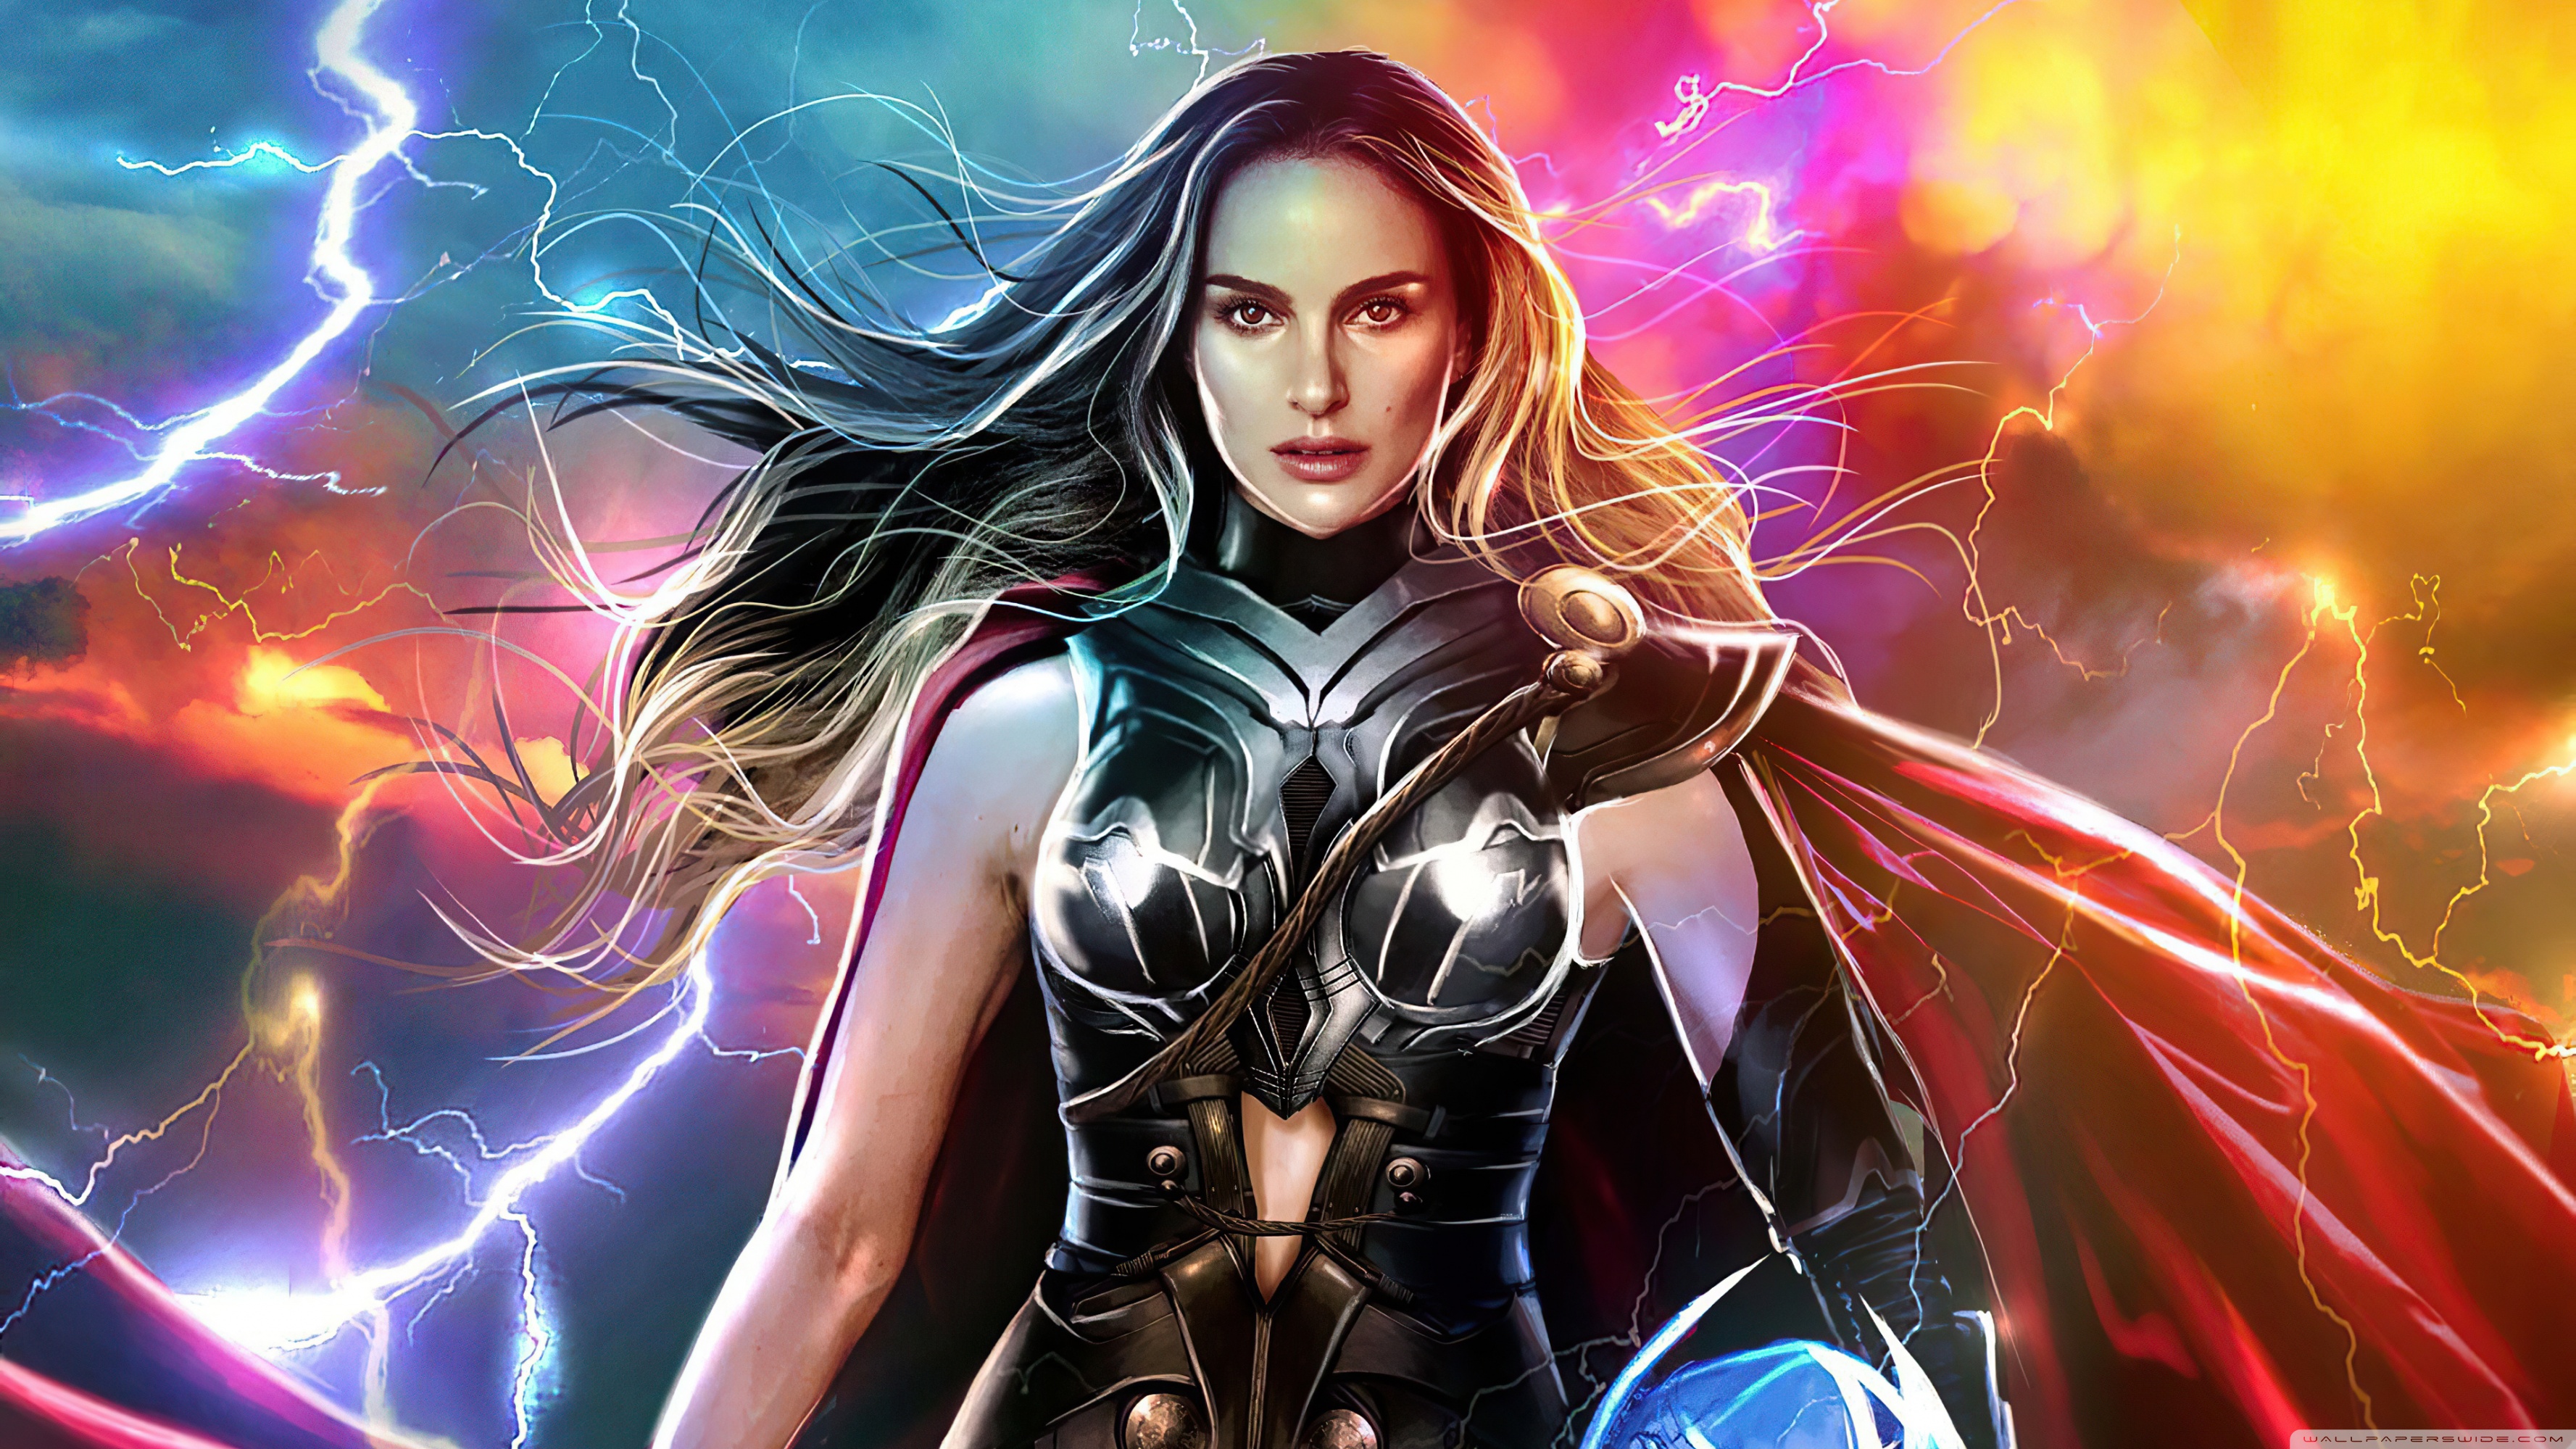 Download Thor Love And Thunder Lady Thor 2022 Movie Ultrahd Wallpaper Wallpapers Printed